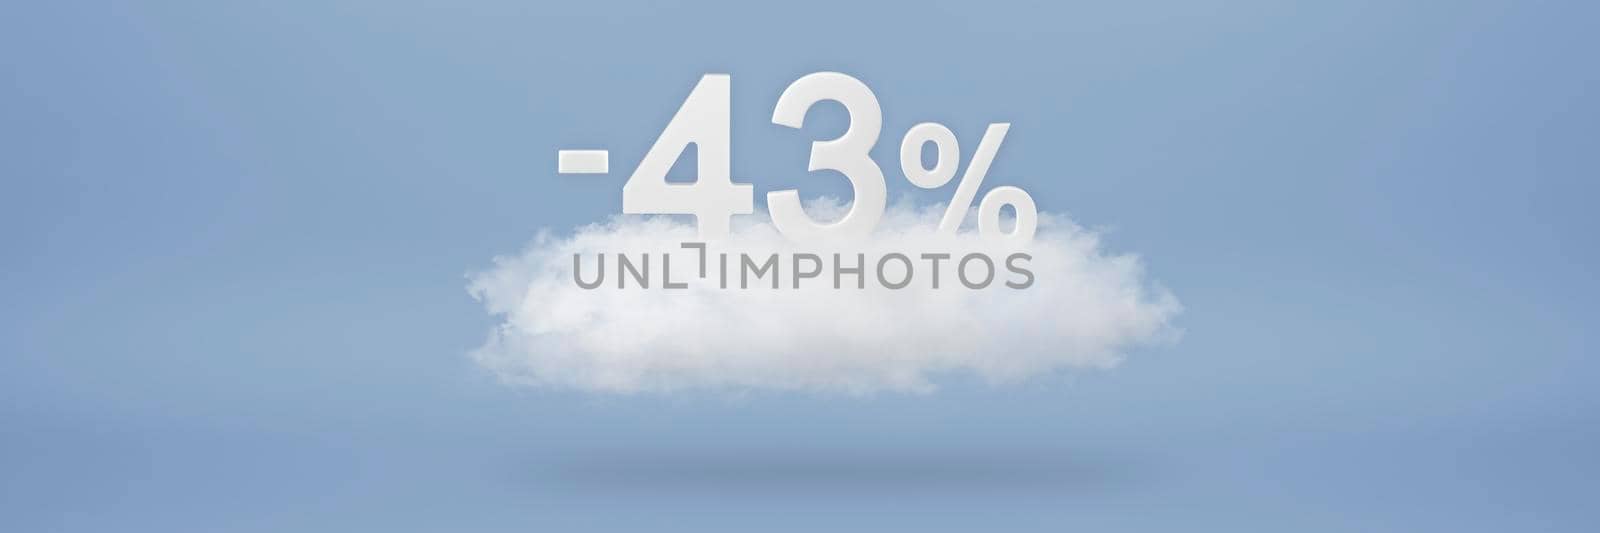 Discount 43 percent. Big discounts, sale up to forty three percent. 3D numbers float on a cloud on a blue background. Copy space. Advertising banner and poster to be inserted into the project.